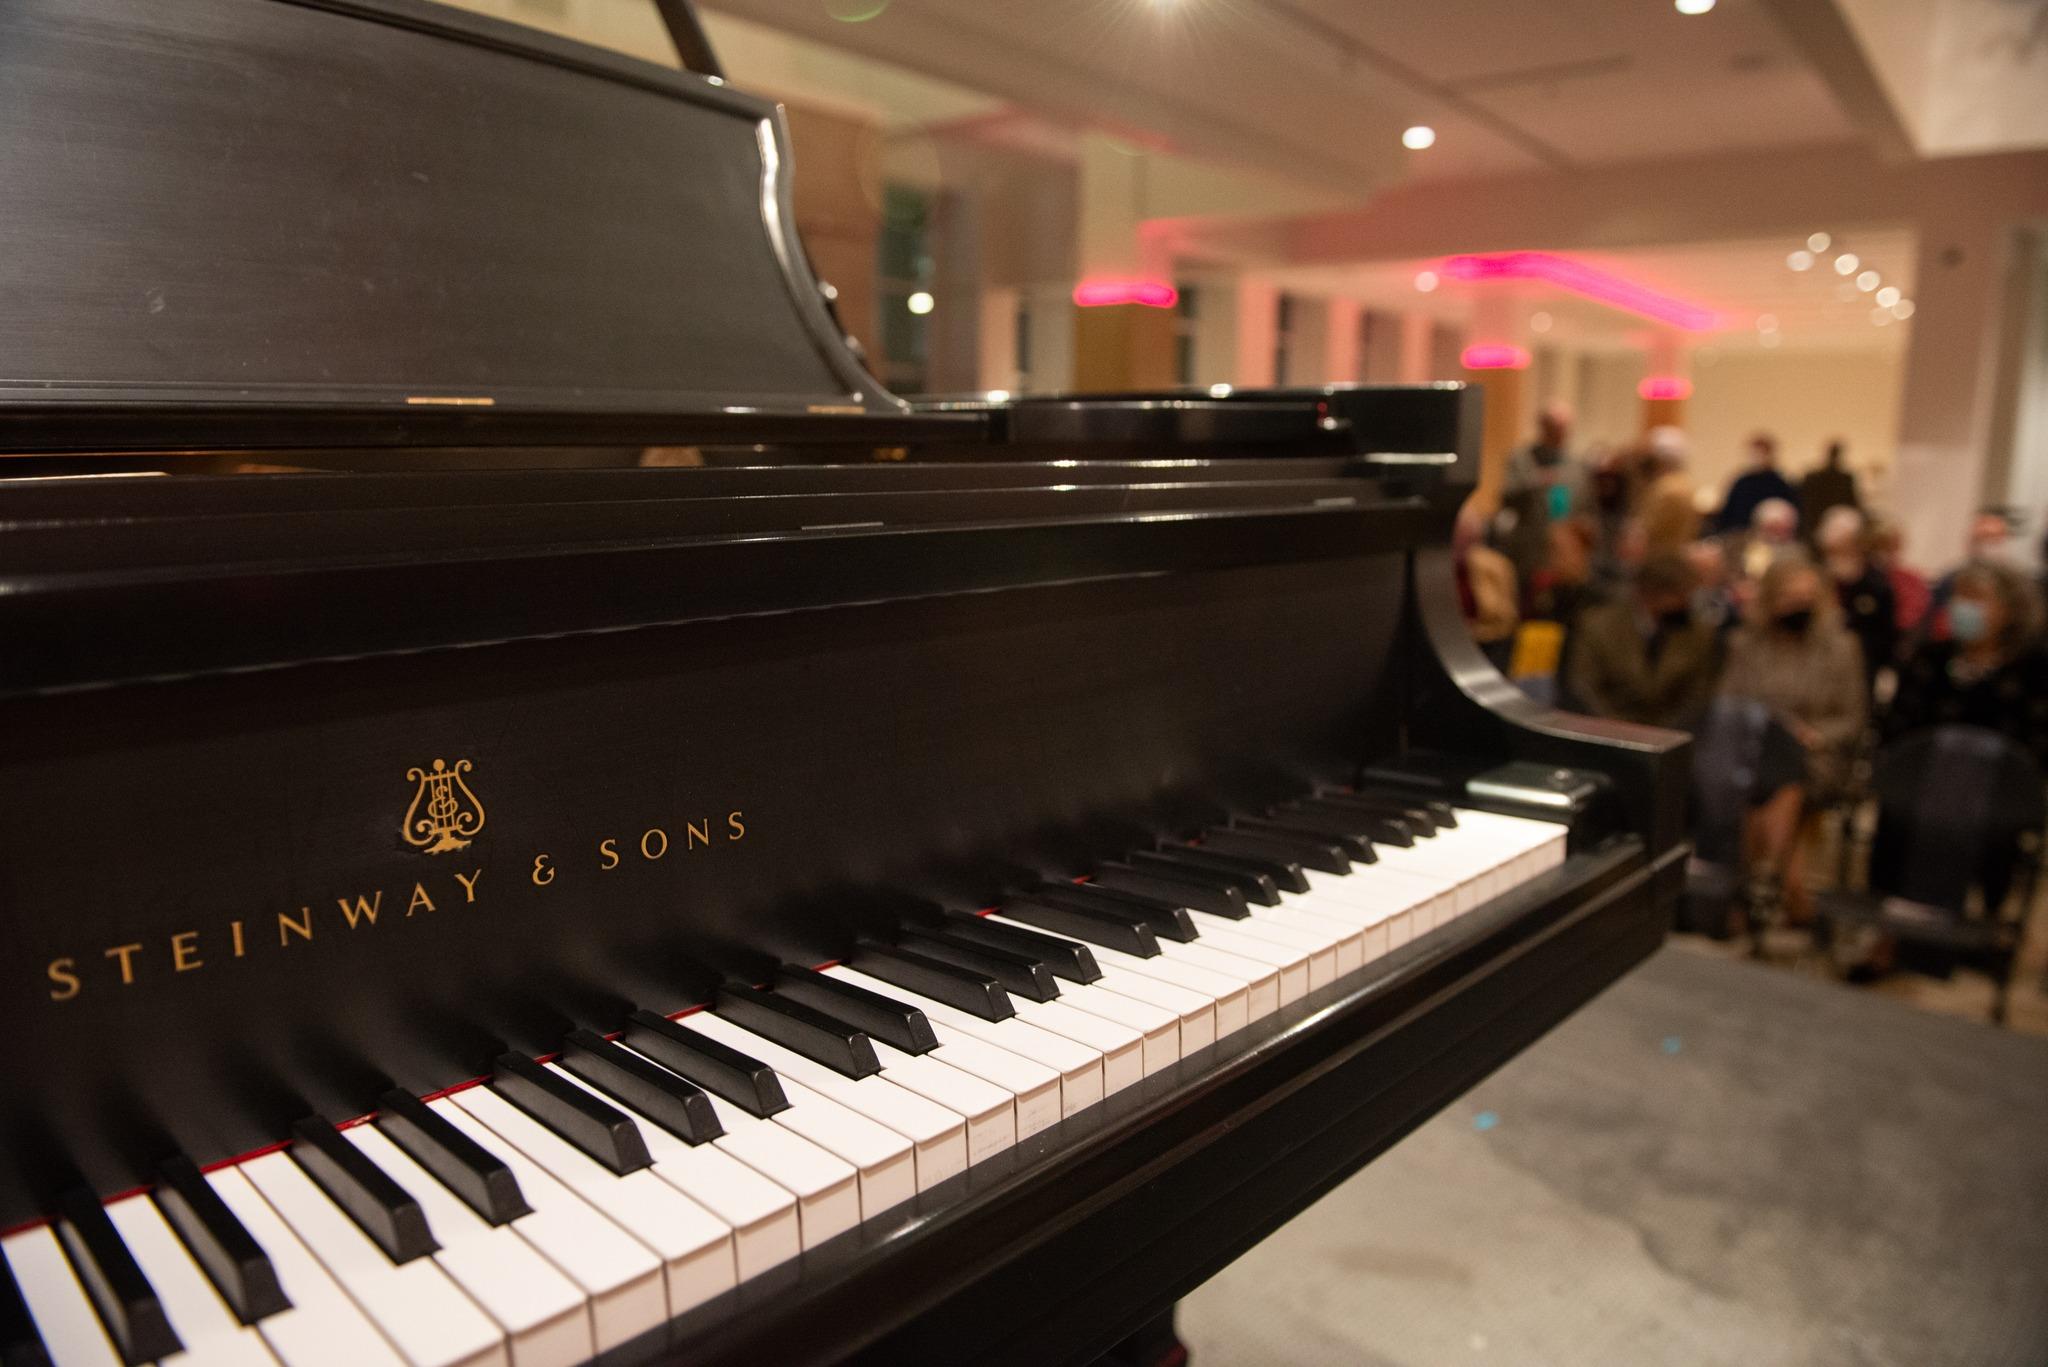 Closeup on the keys of a Steinway & Sons grand piano with an indistinct crowd in the background